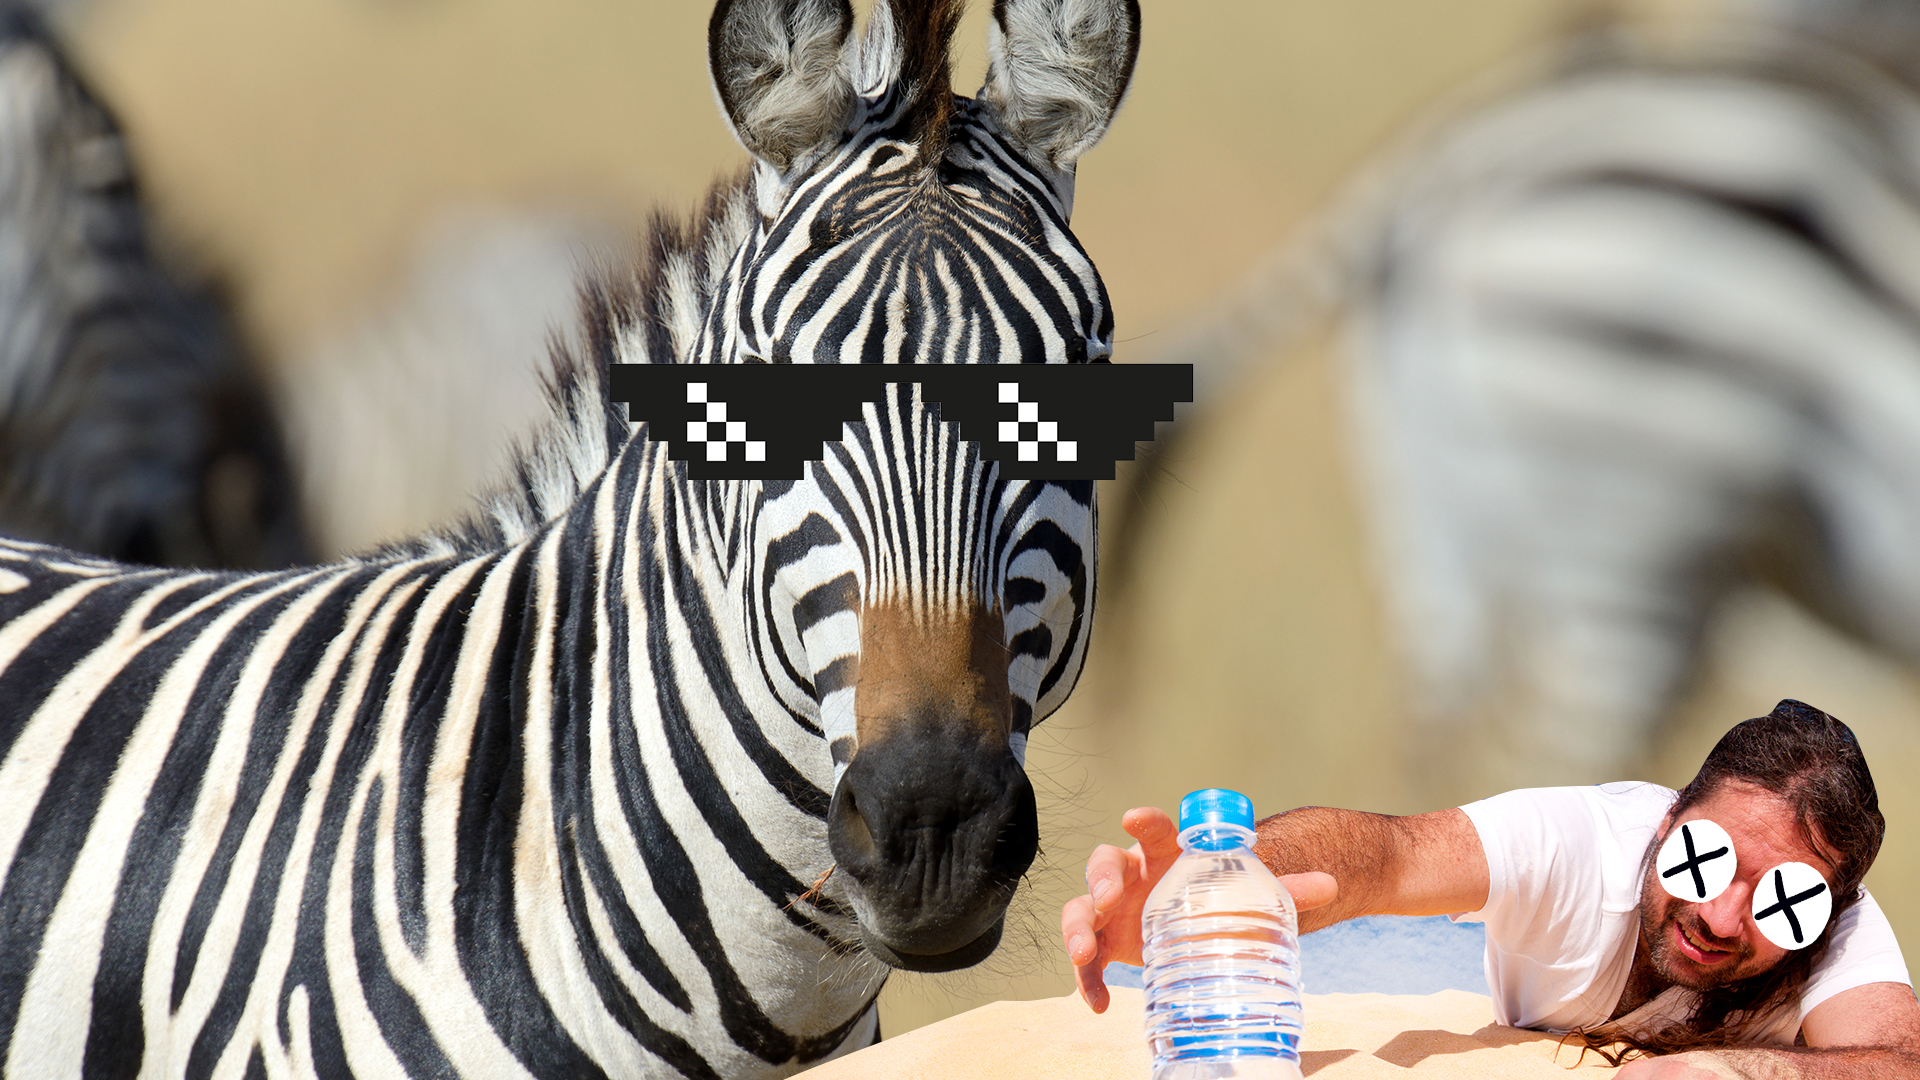 15 Fun Zebra Facts You Never Knew